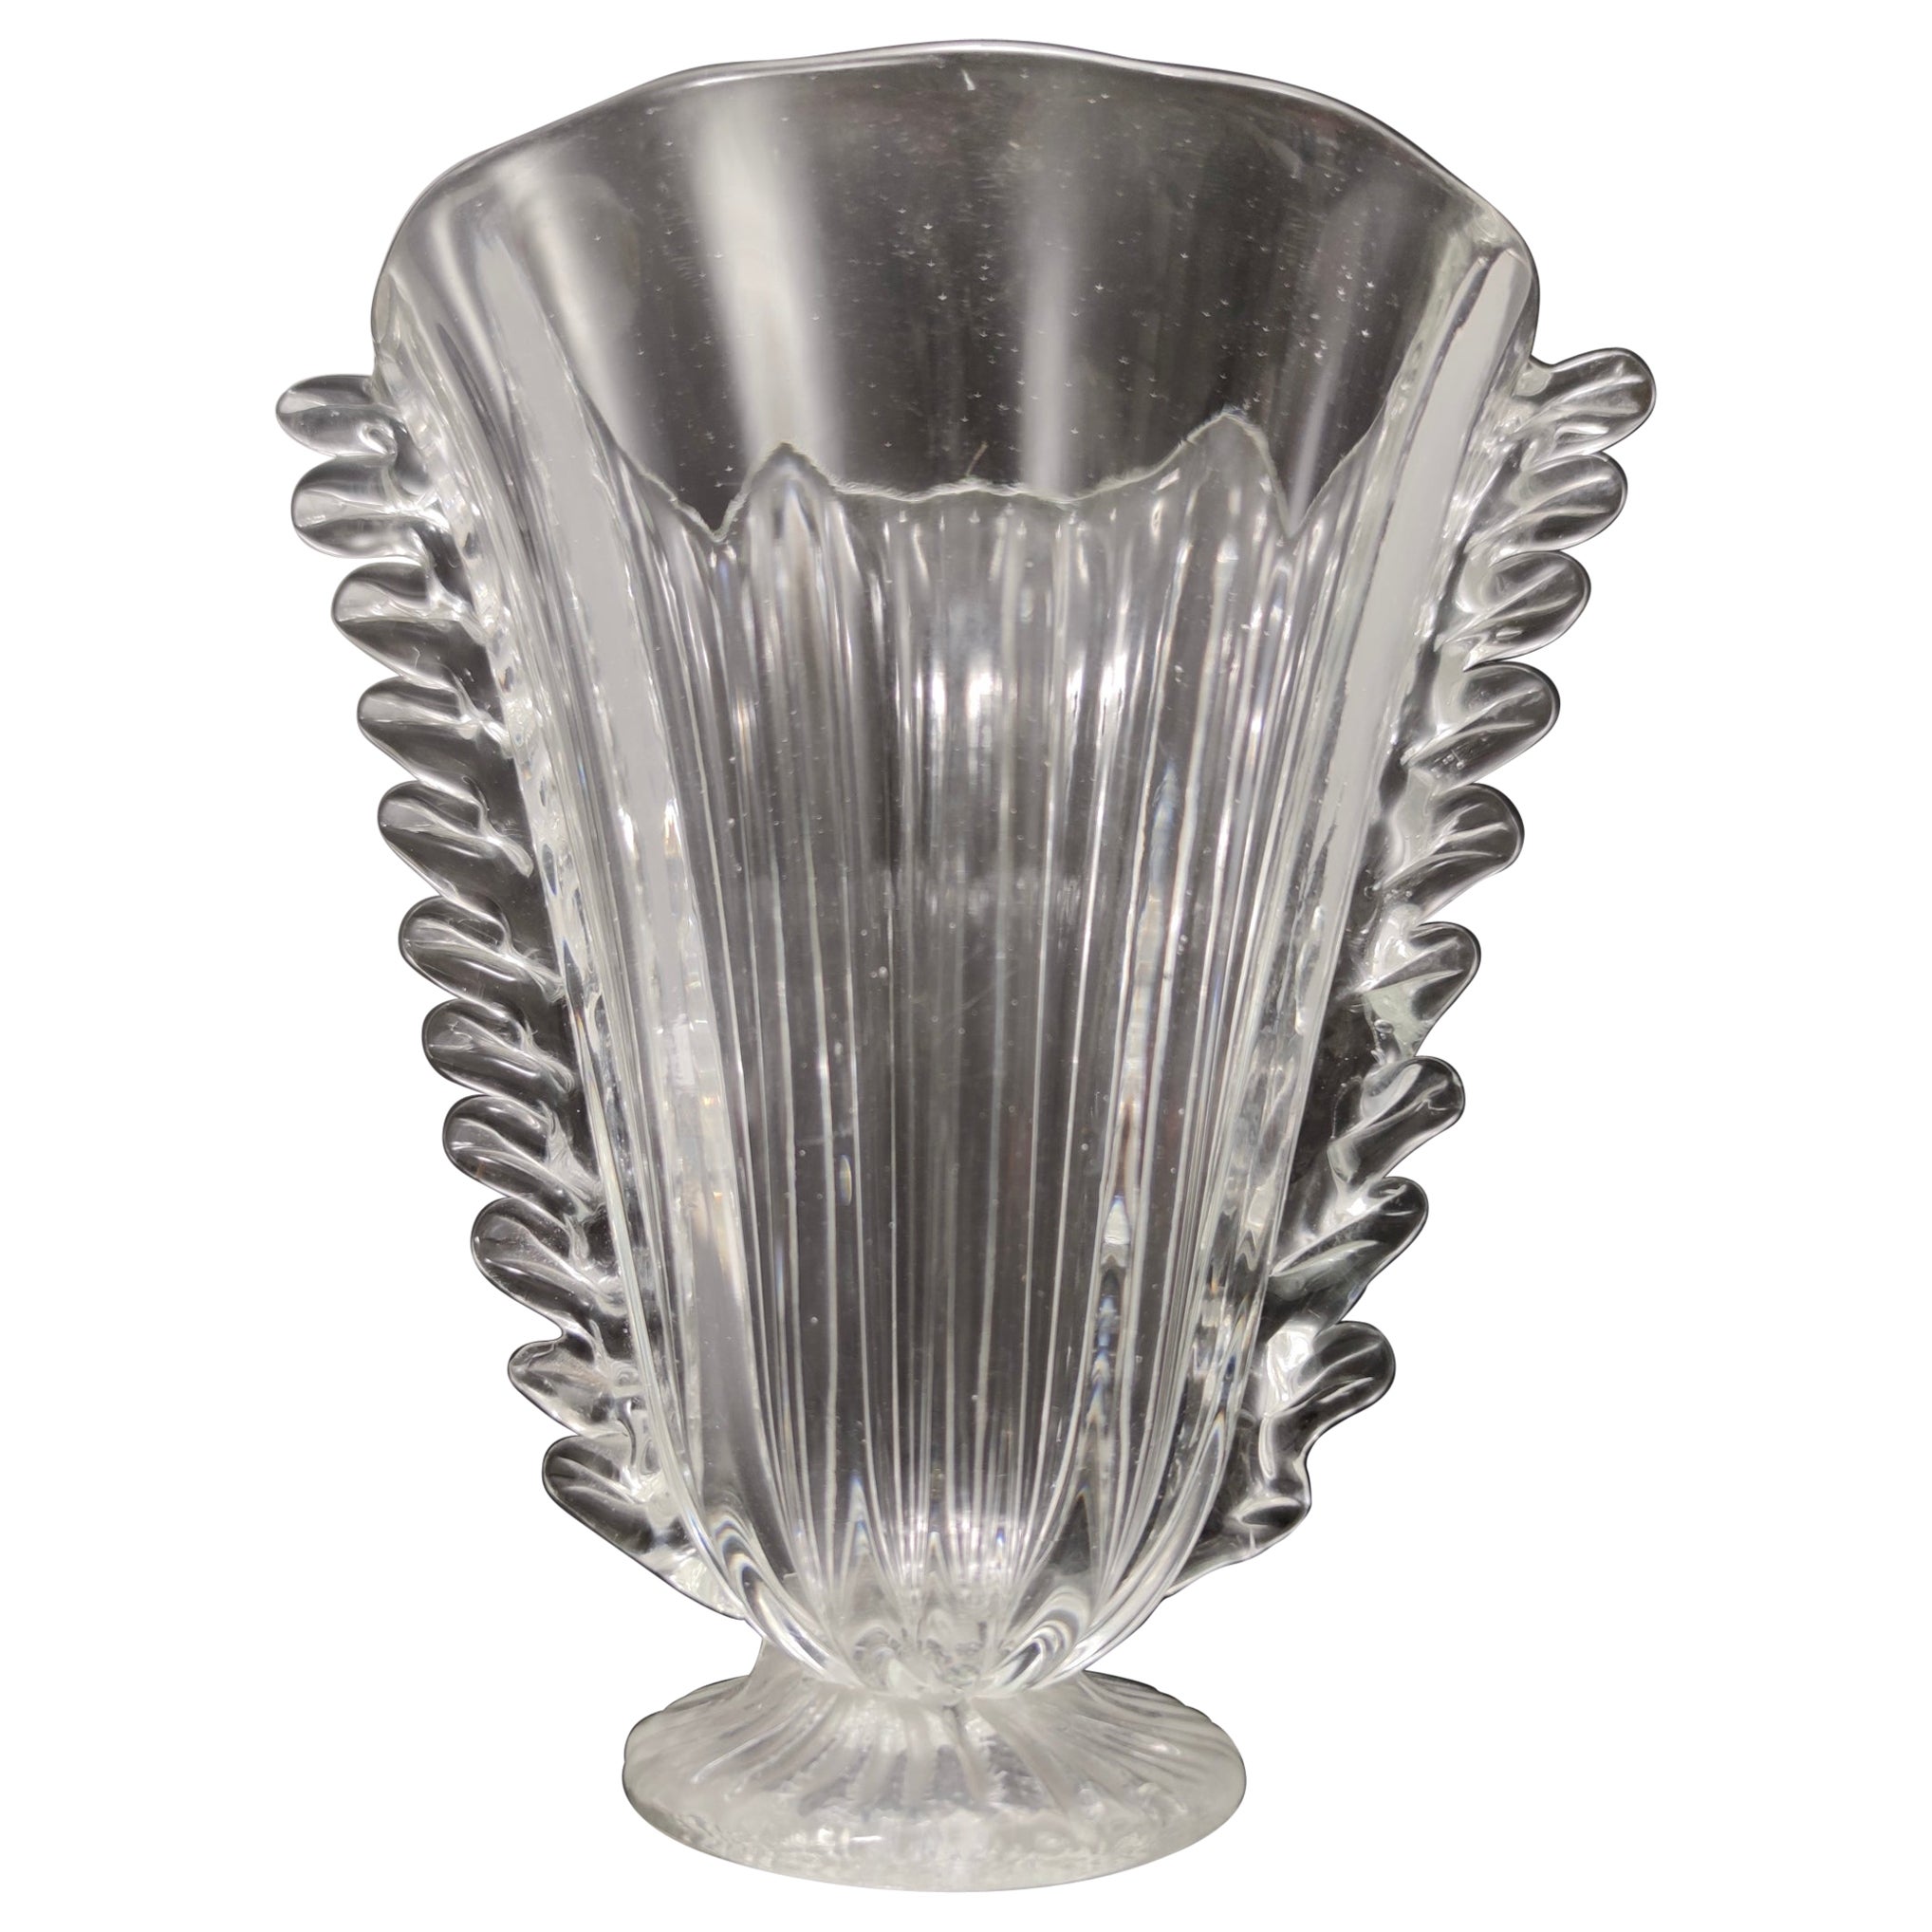 Vintage Transparent Murano Glass Vase by Barovier and Toso, Italy